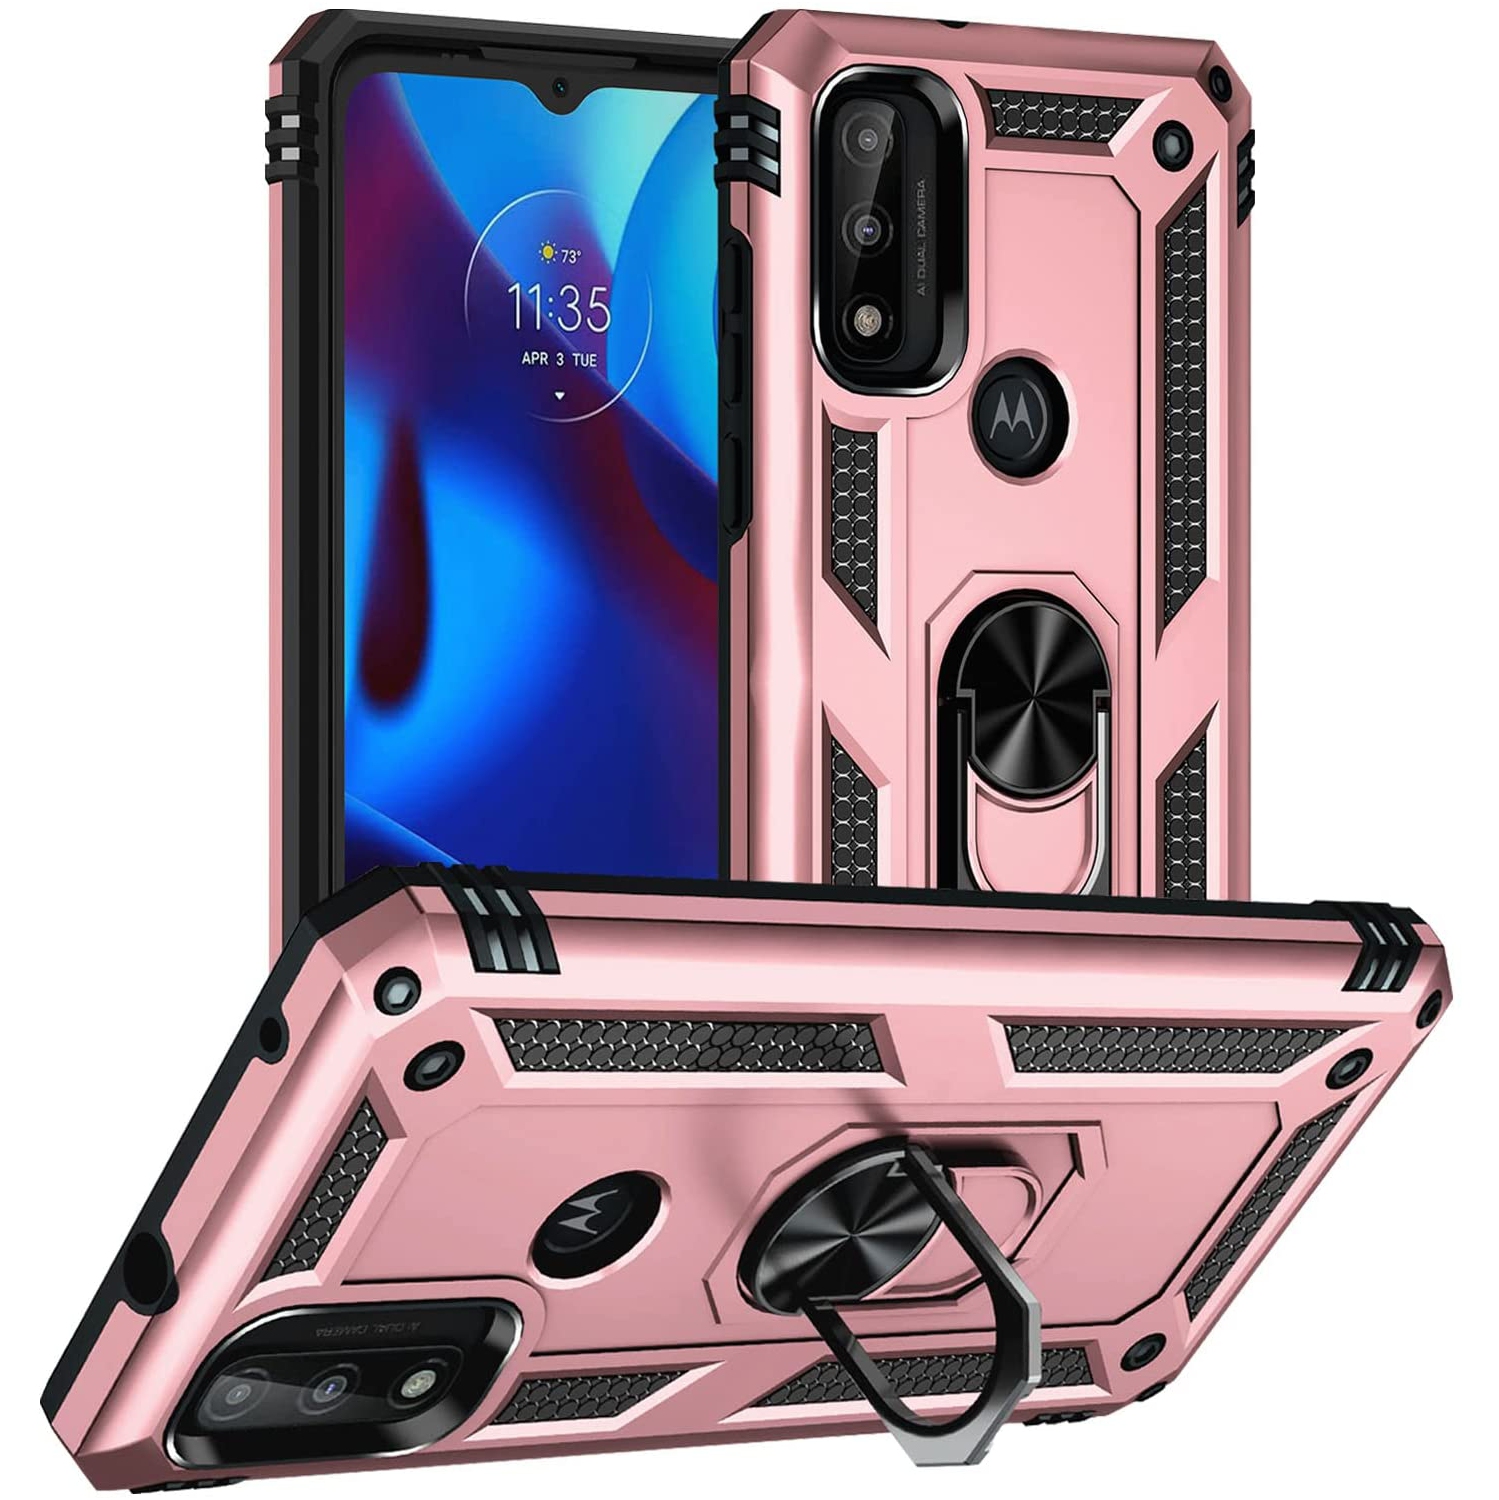 Anti-Drop Hybrid Magnetic Hard Armor Case with Ring Holder for Motorola Moto G Pure 2021 / G Power 2022 / G Play 2023, Rose Gold